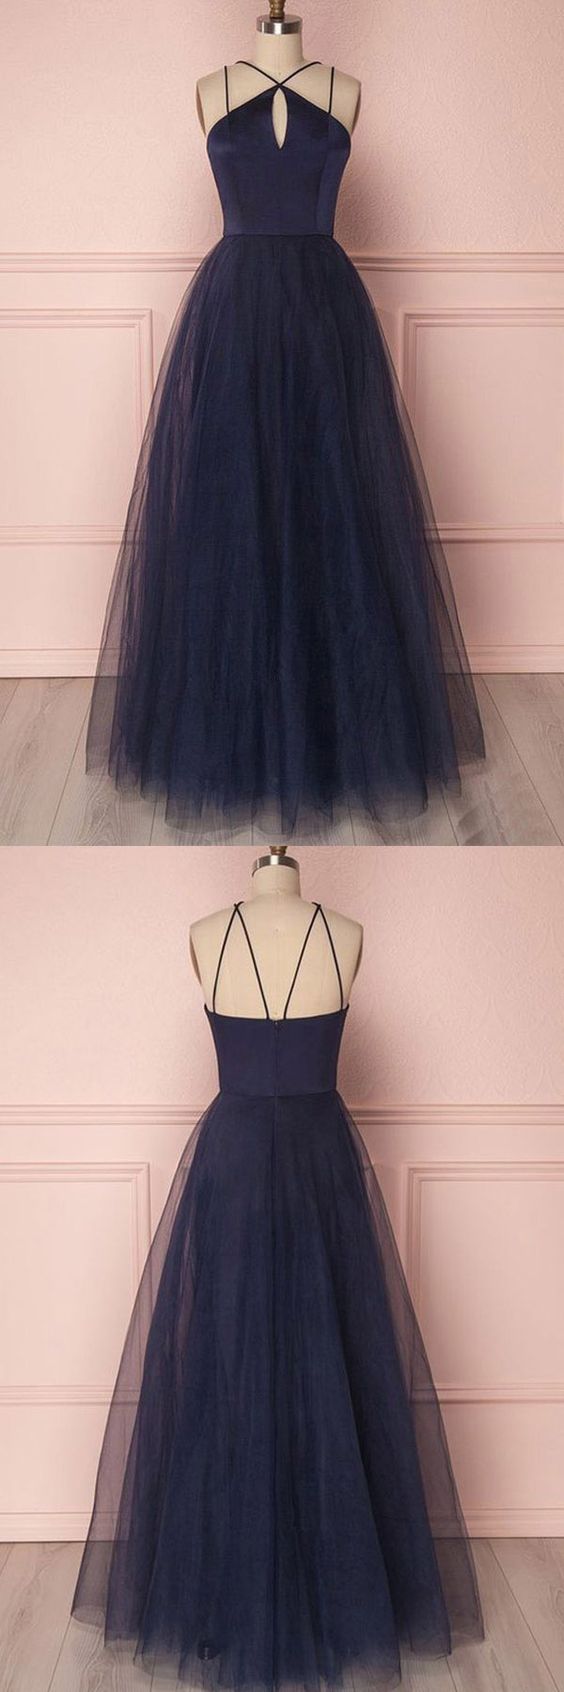 Dark Navy Tulle Simple Senior Prom Dress,Long Party Formal Gown,GDC1132-Dolly Gown